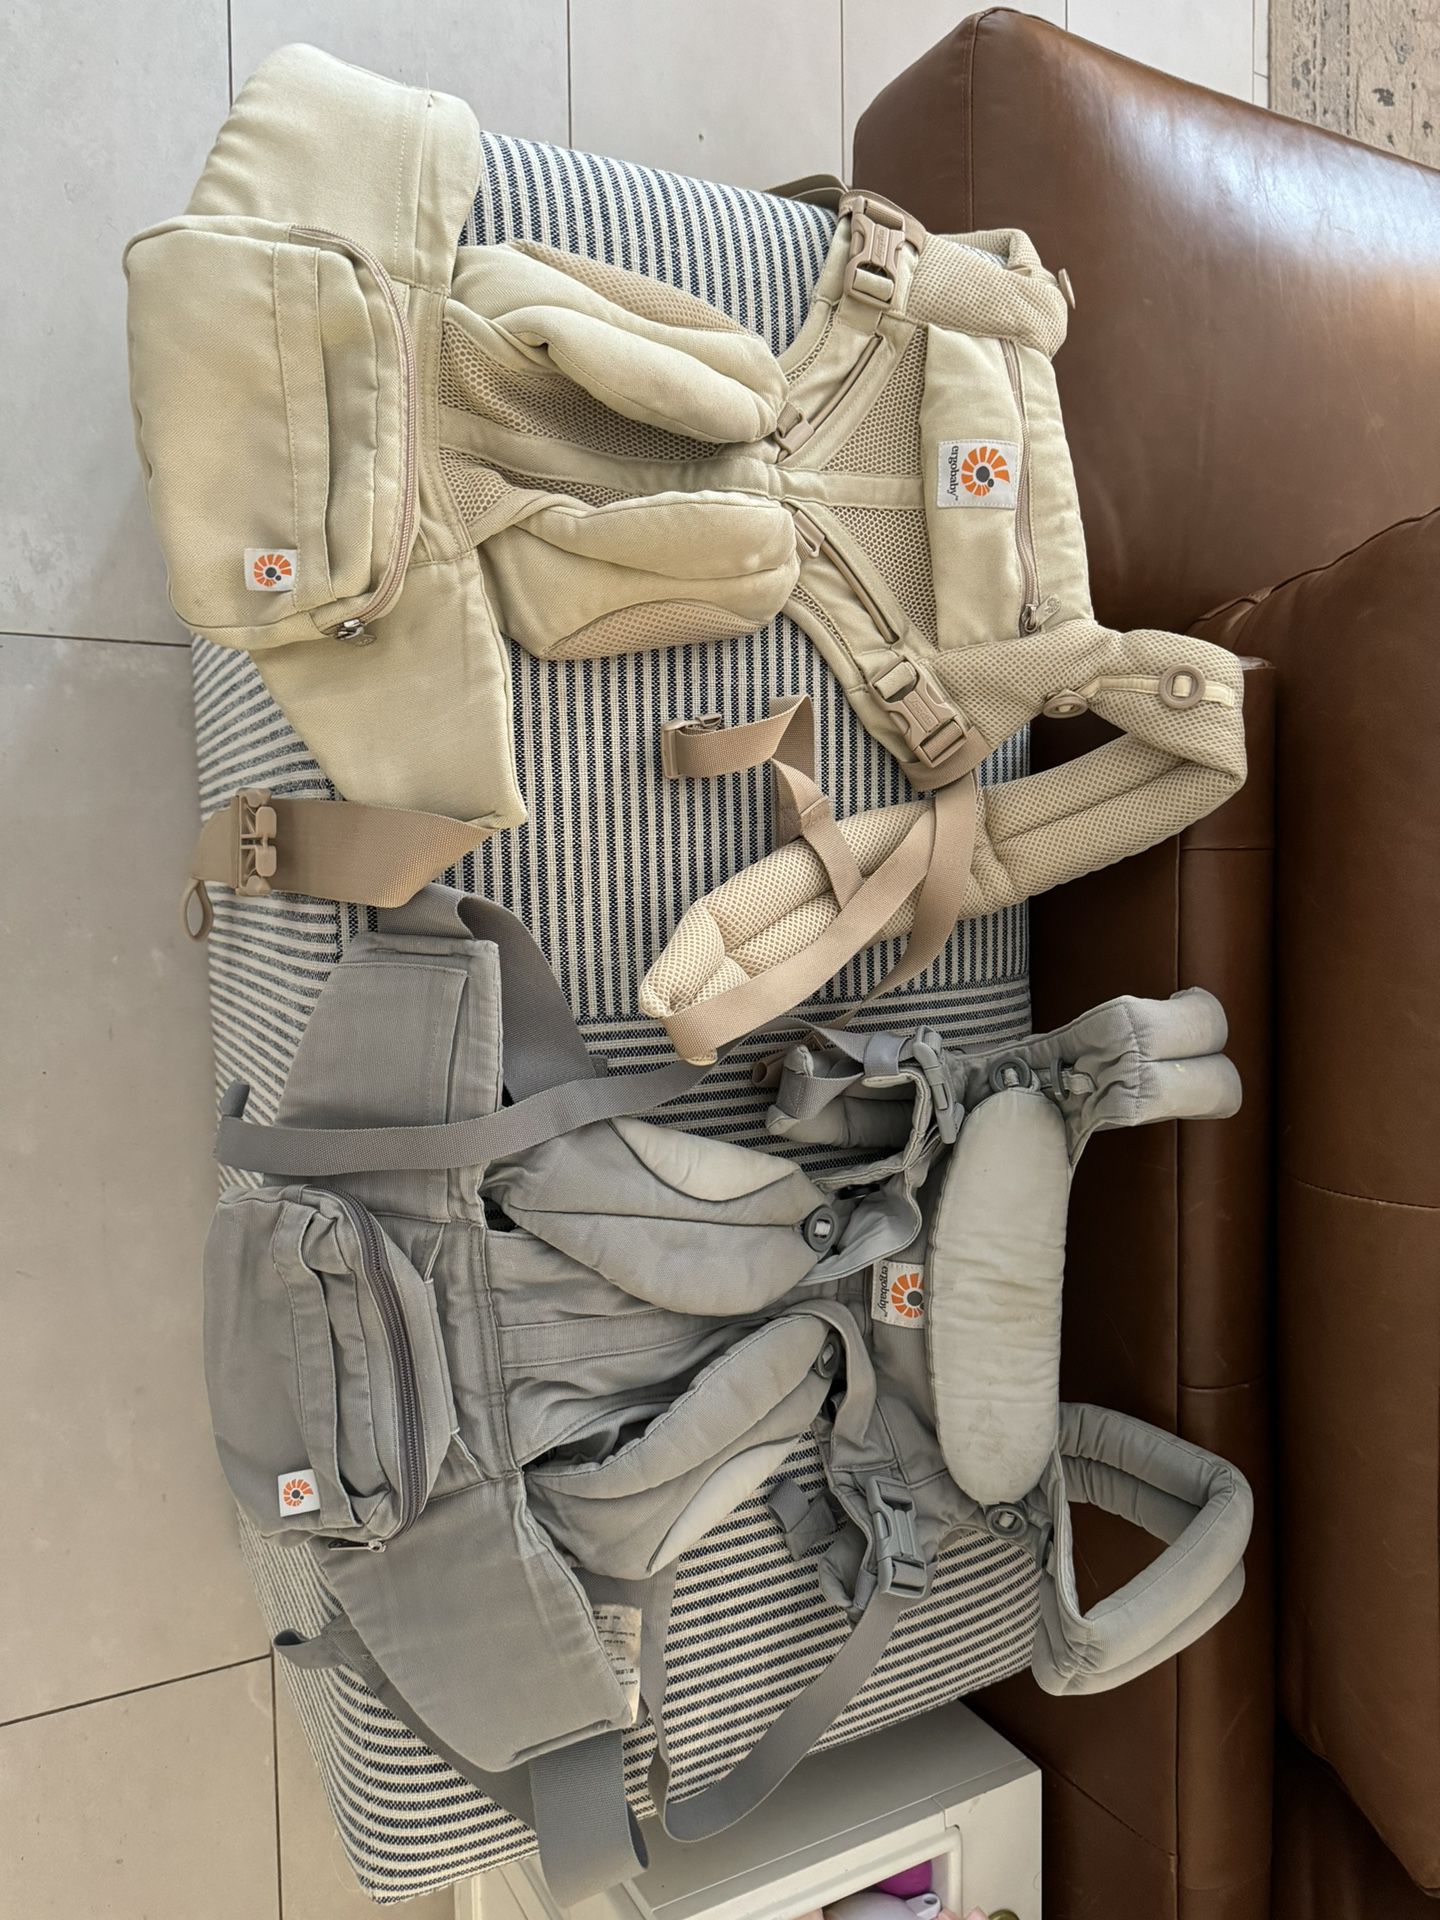 2 Ergo Baby Carriers For $120